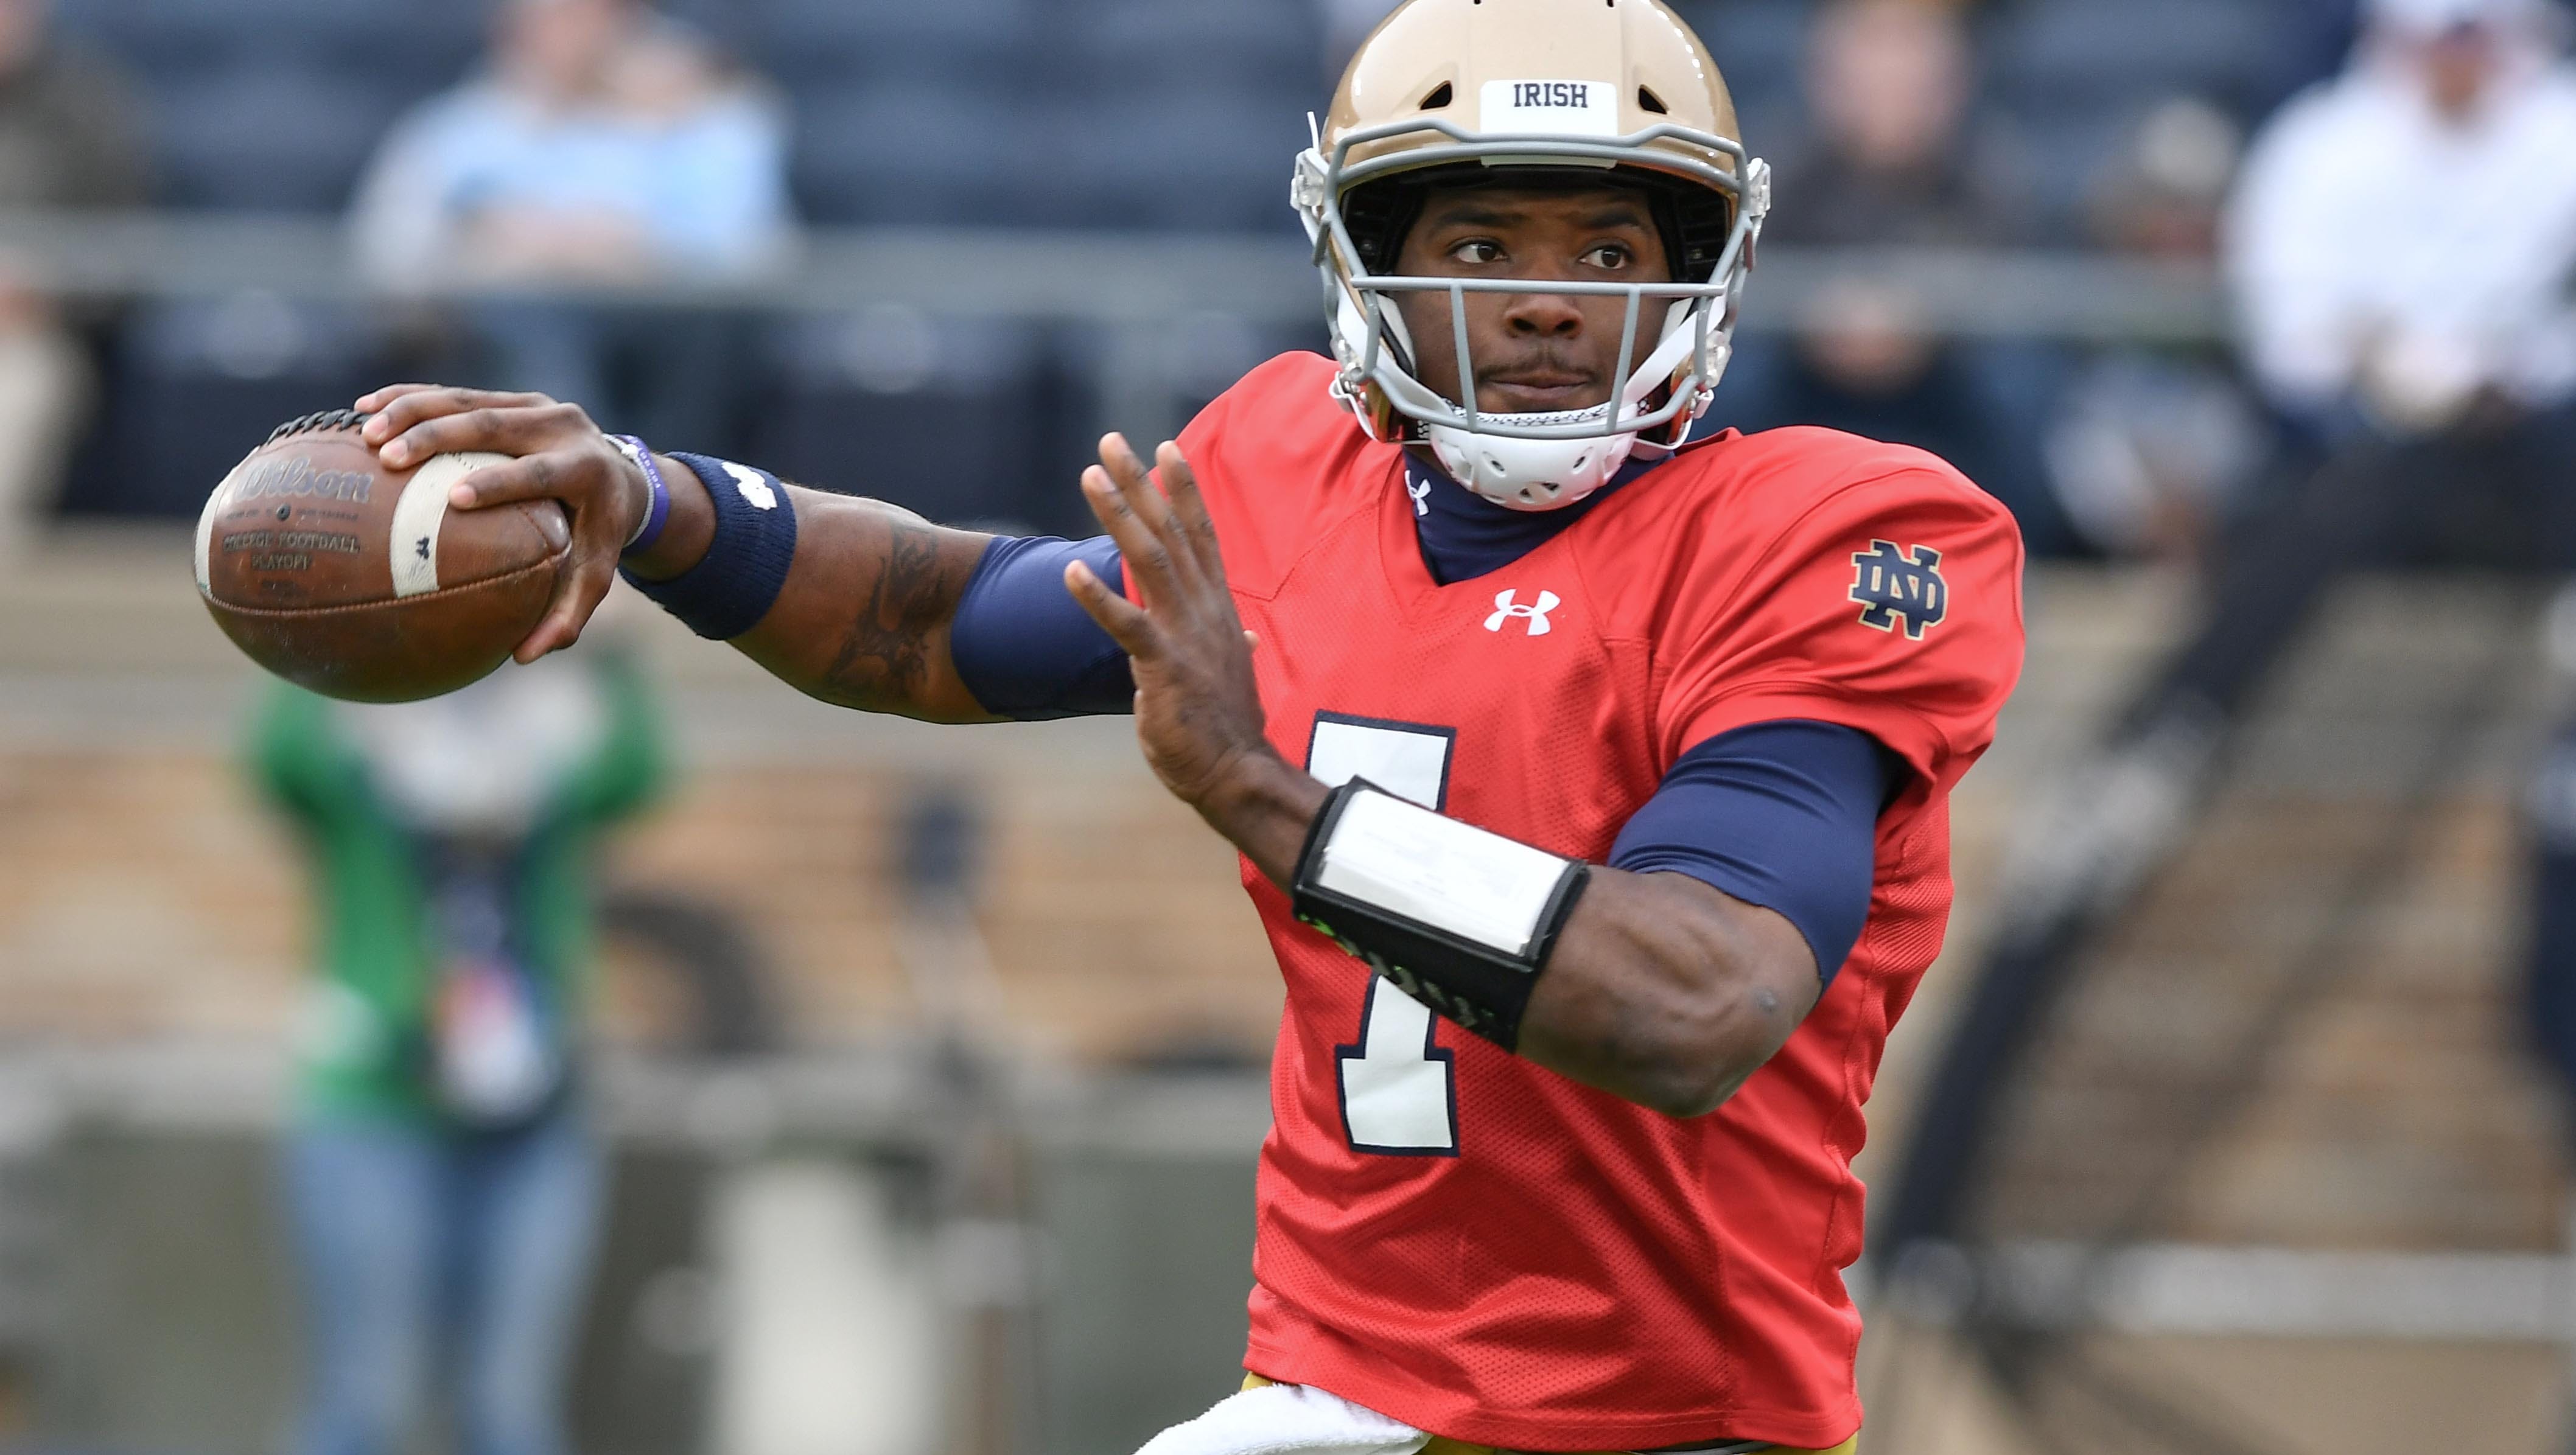 Brandon Wimbush needs to find consistency to hold off Ian Book and others.